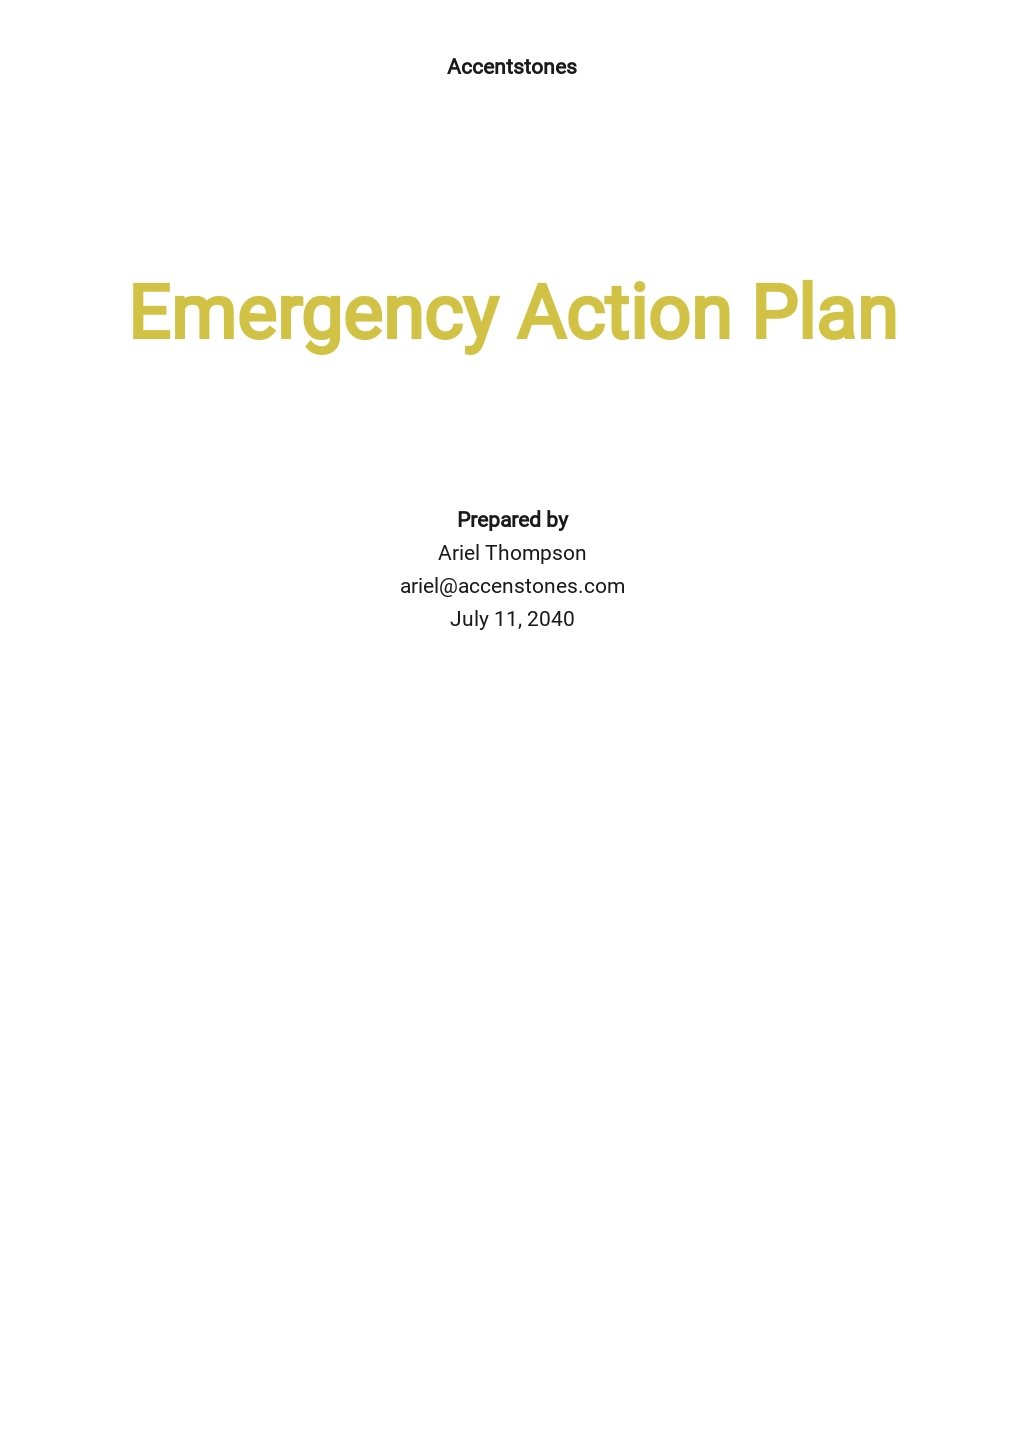 Church Emergency Action Plan Template in Google Docs, Word